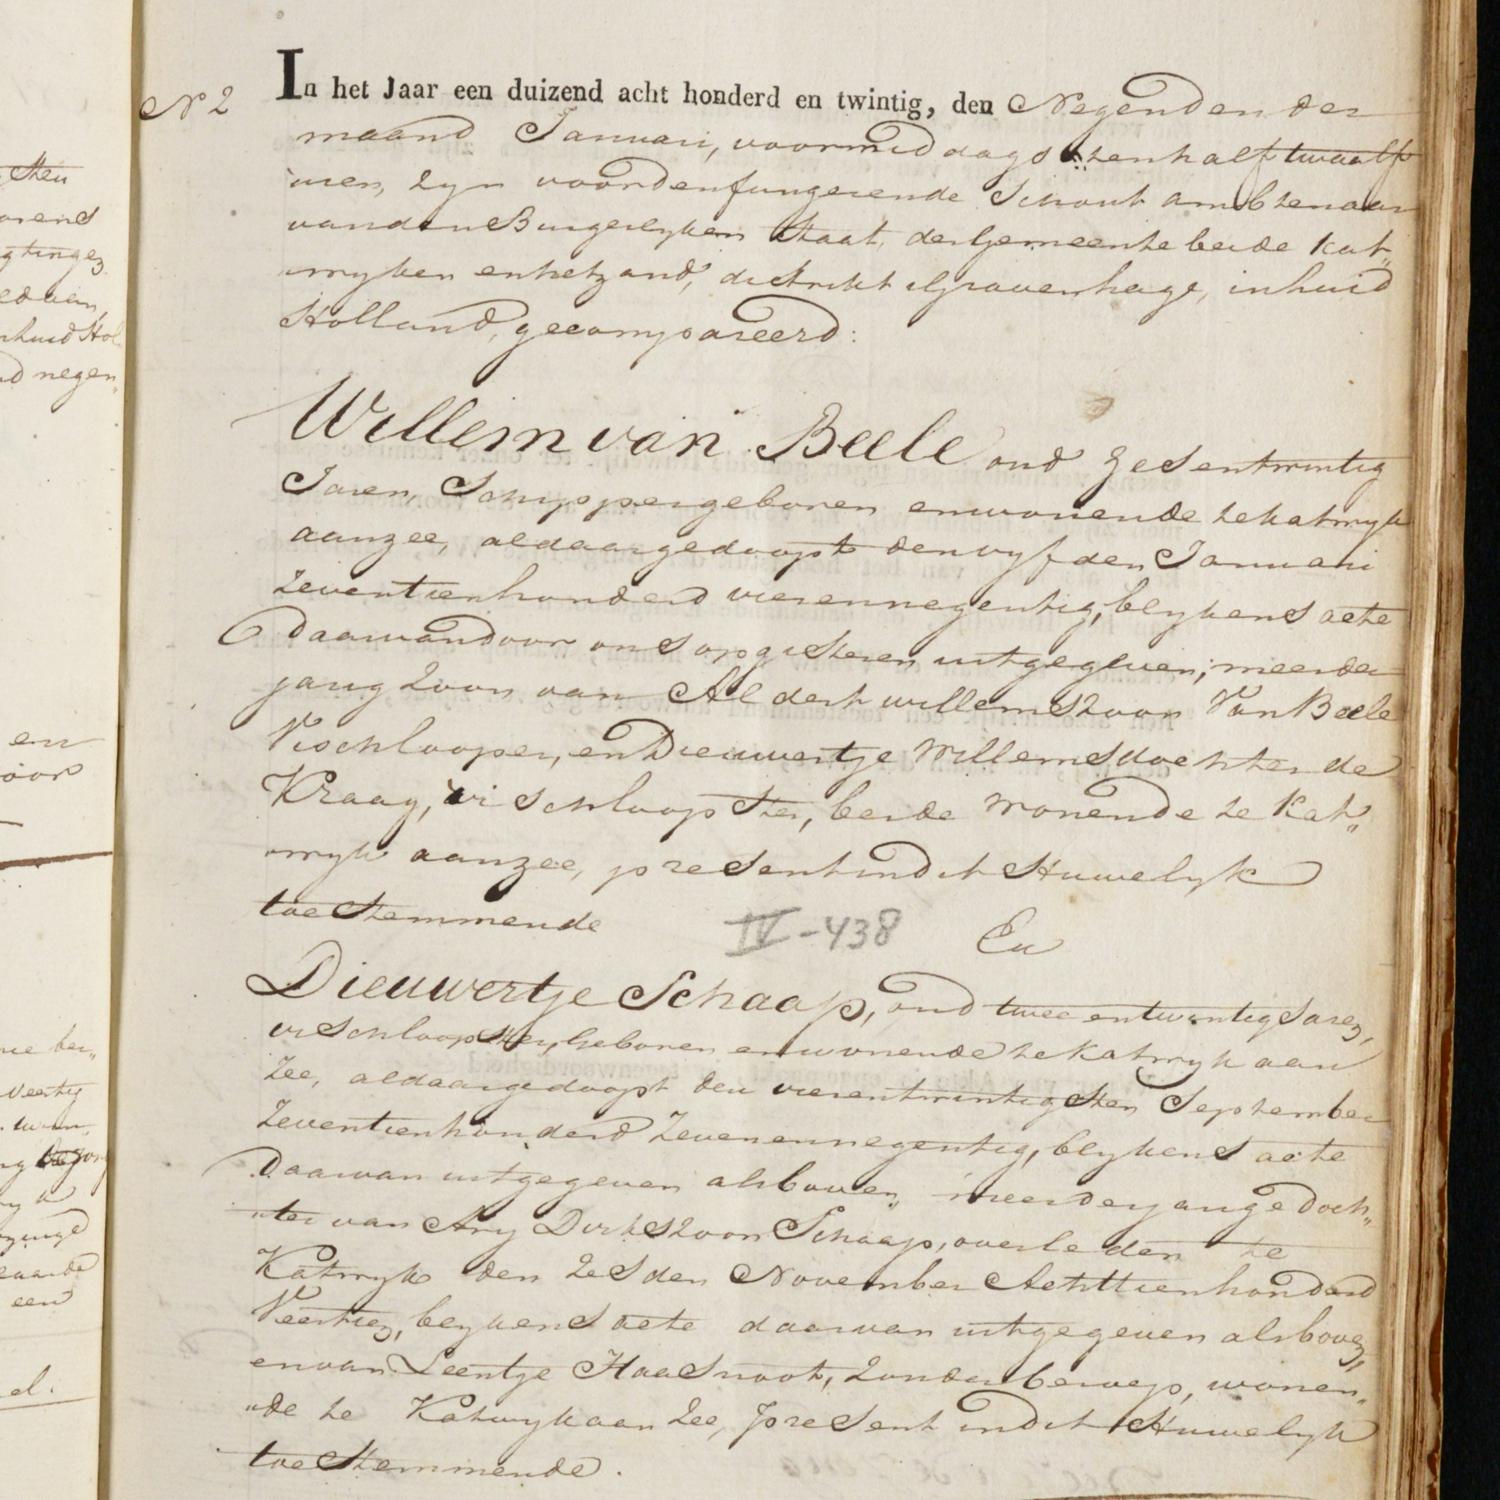 Civil registry of marriages, Katwijk, 1820, record 2, first page